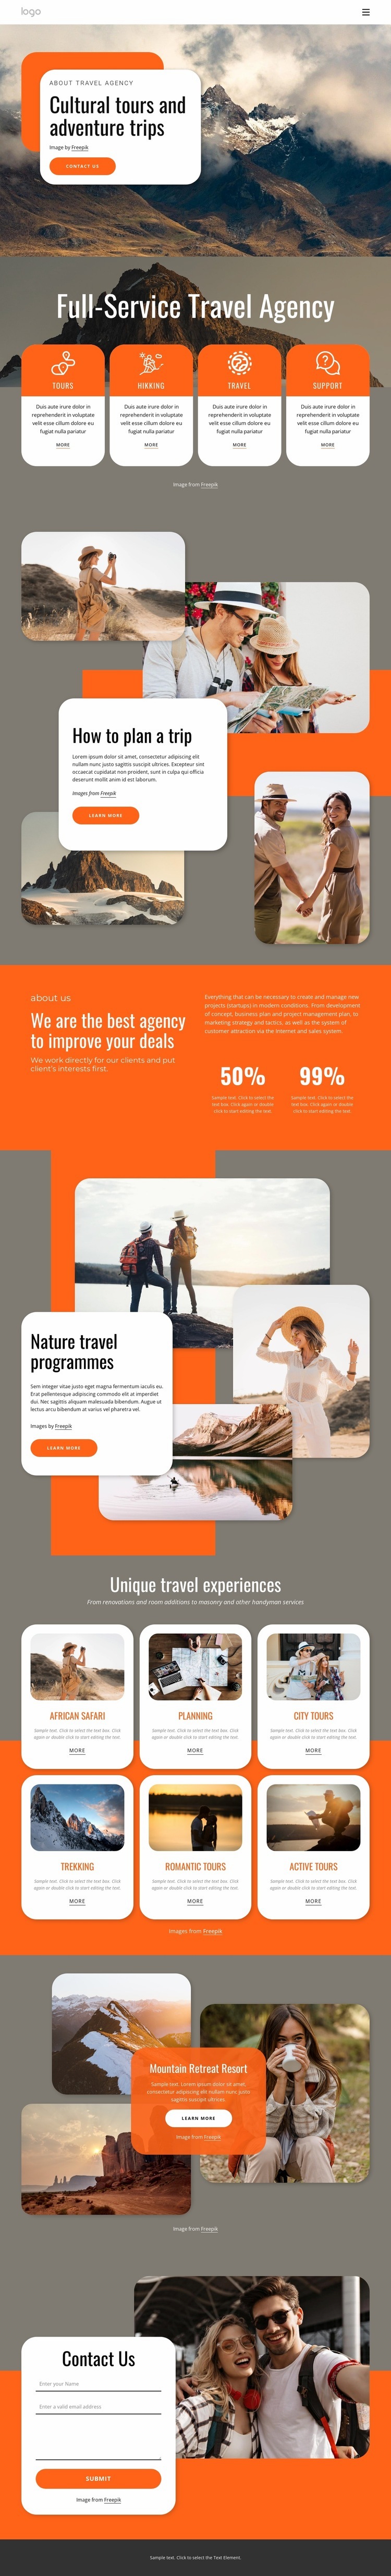 Group travel for all ages Html Code Example